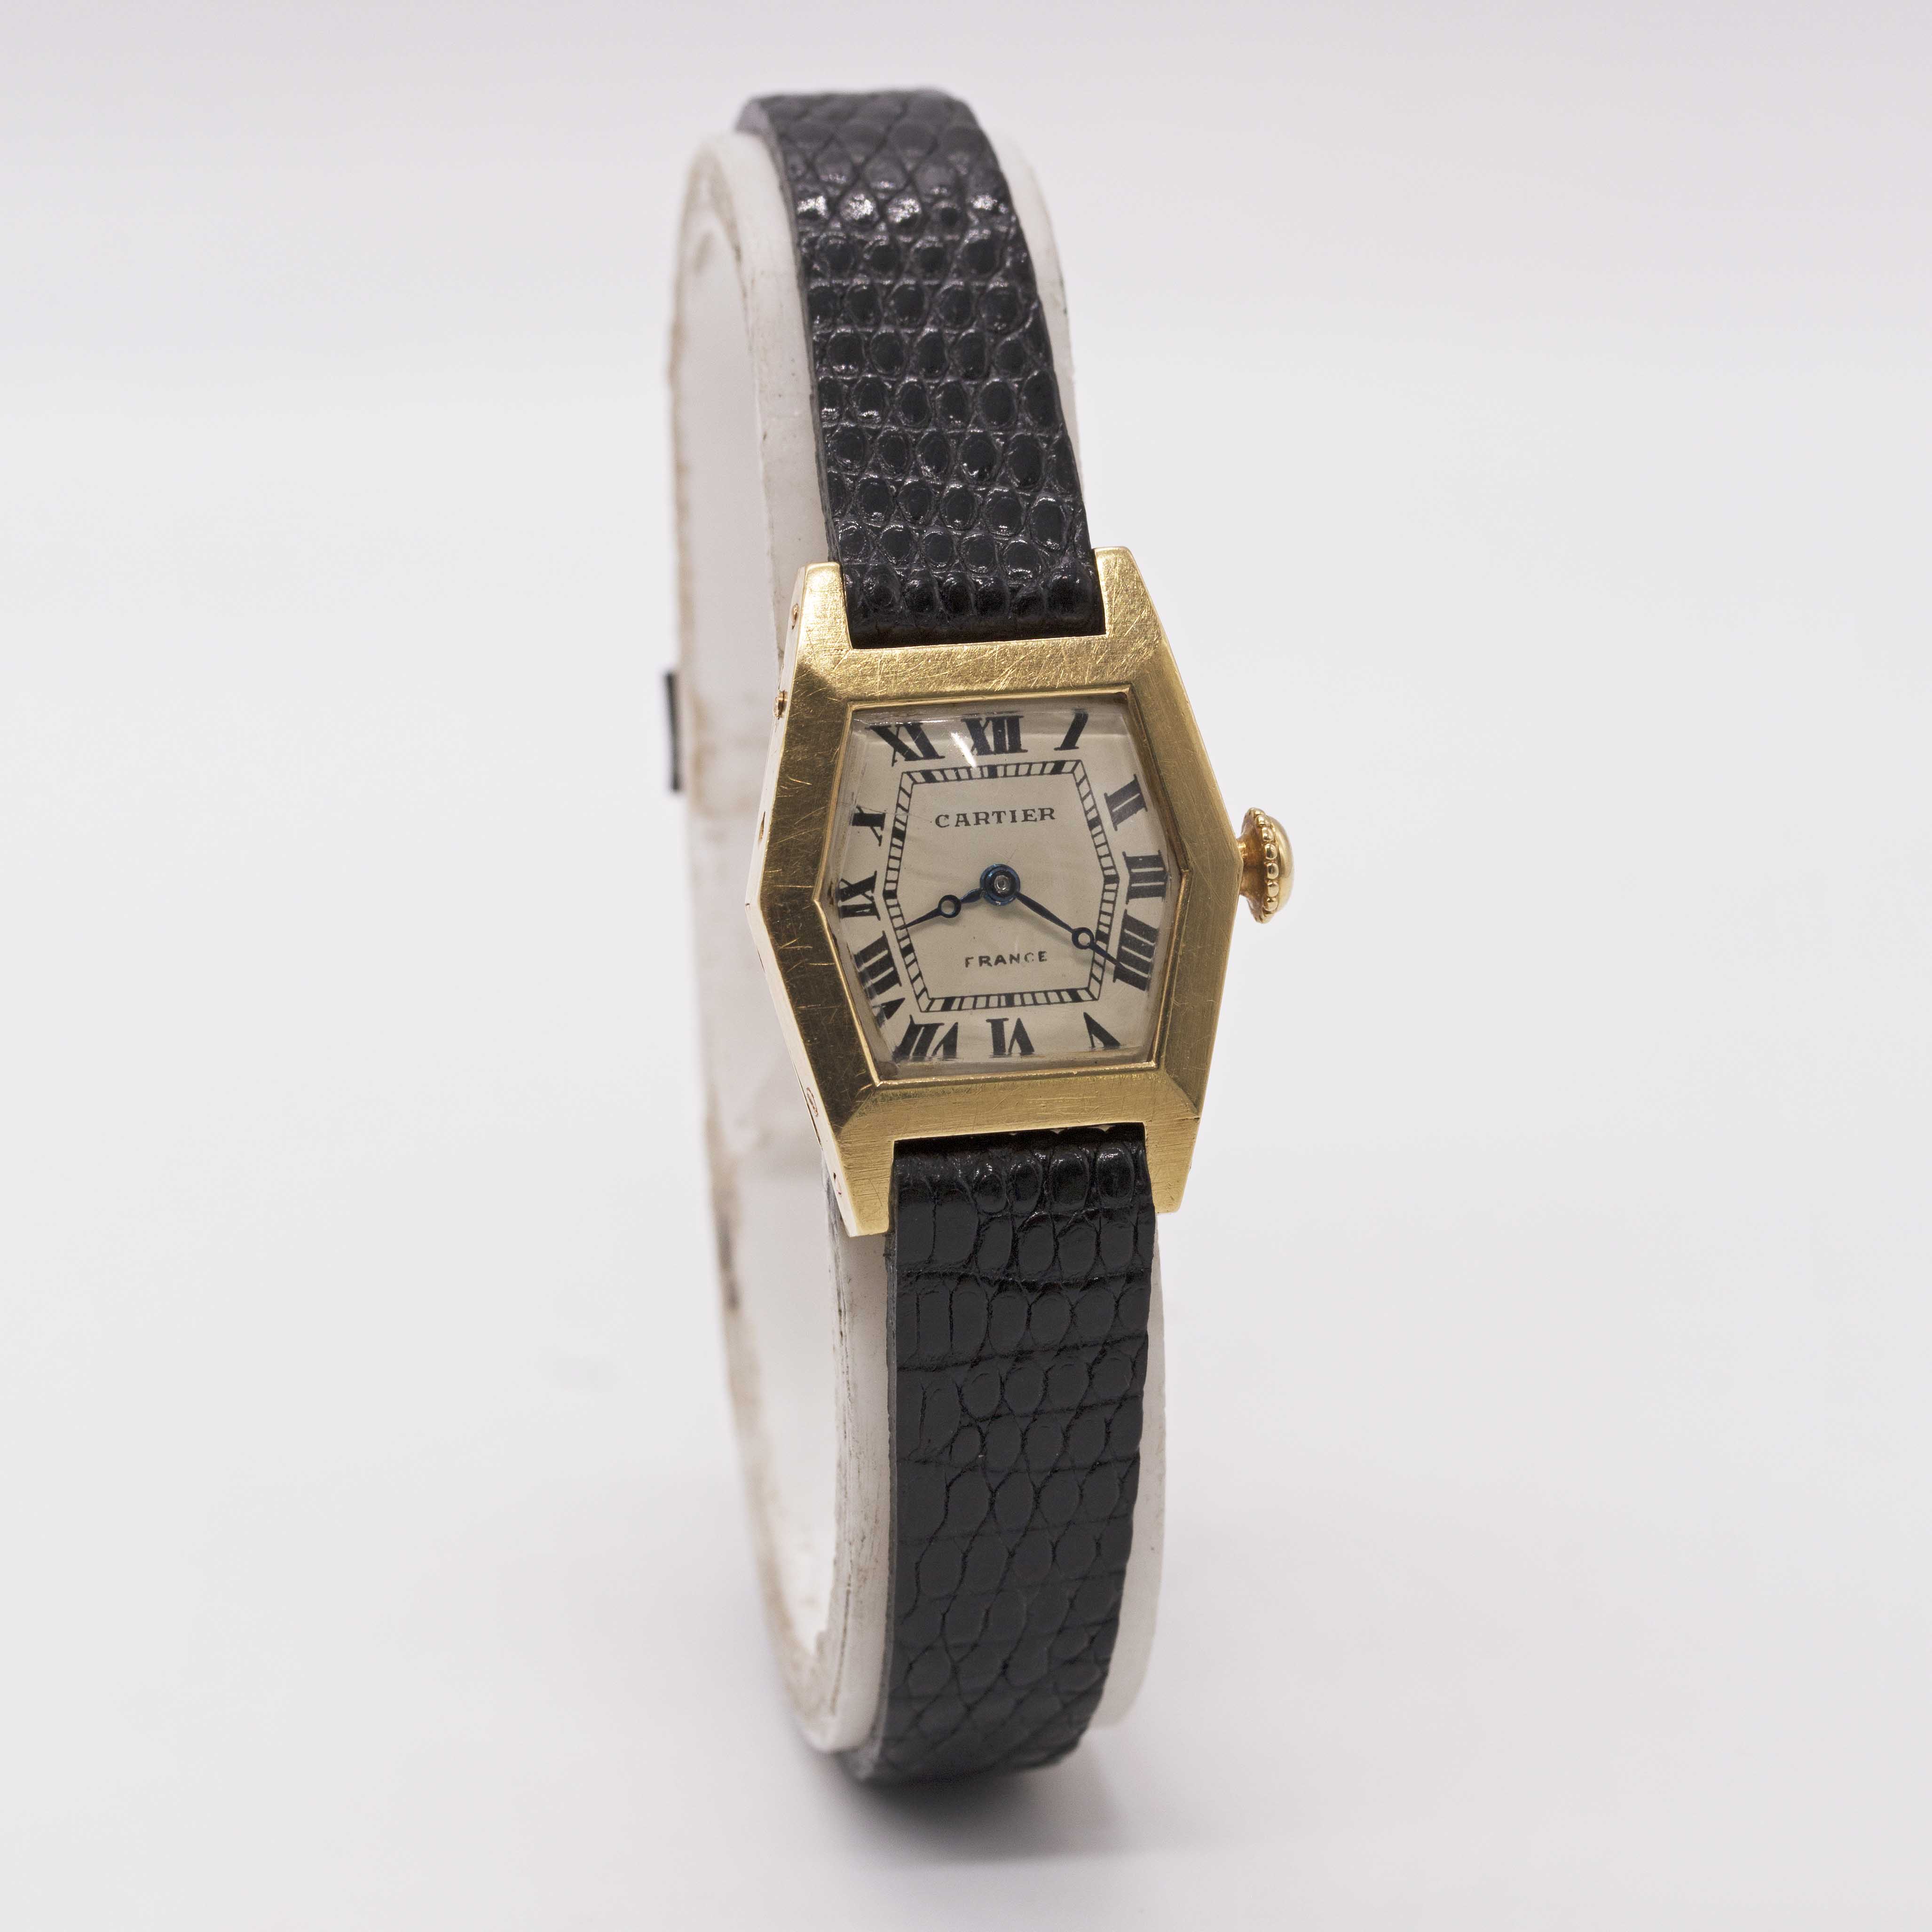 A RARE LADIES 18K SOLID GOLD CARTIER FRANCE WRIST WATCH CIRCA 1940 - Image 4 of 9